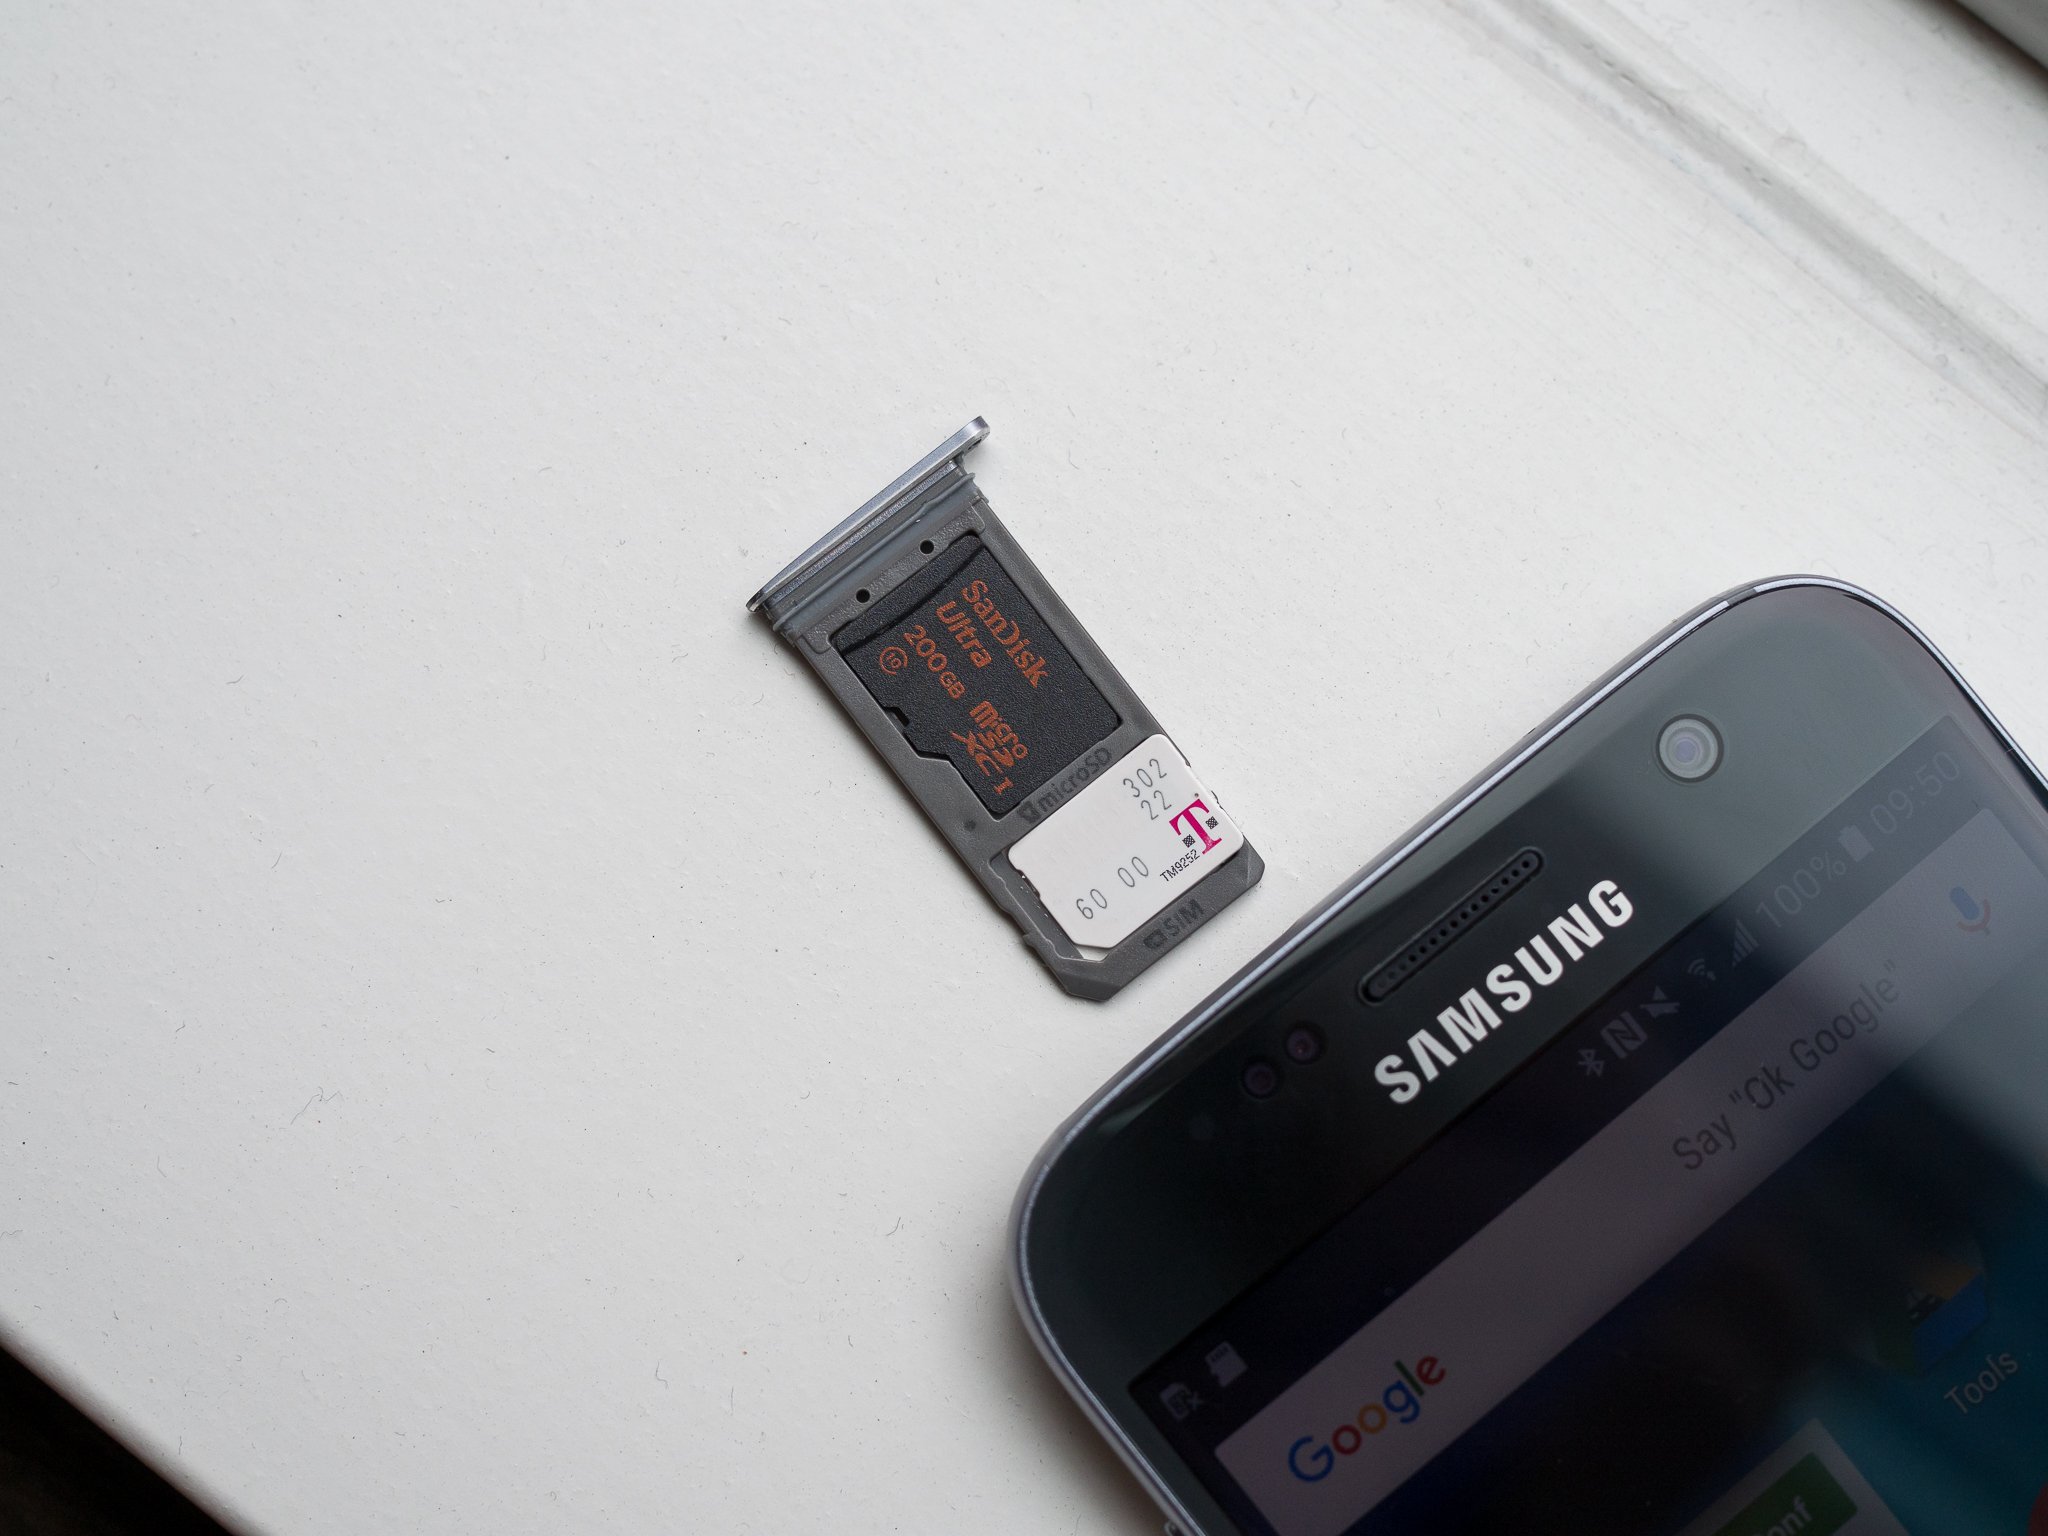 microSD Returns To The Samsung Galaxy S7. Here's Why It Was